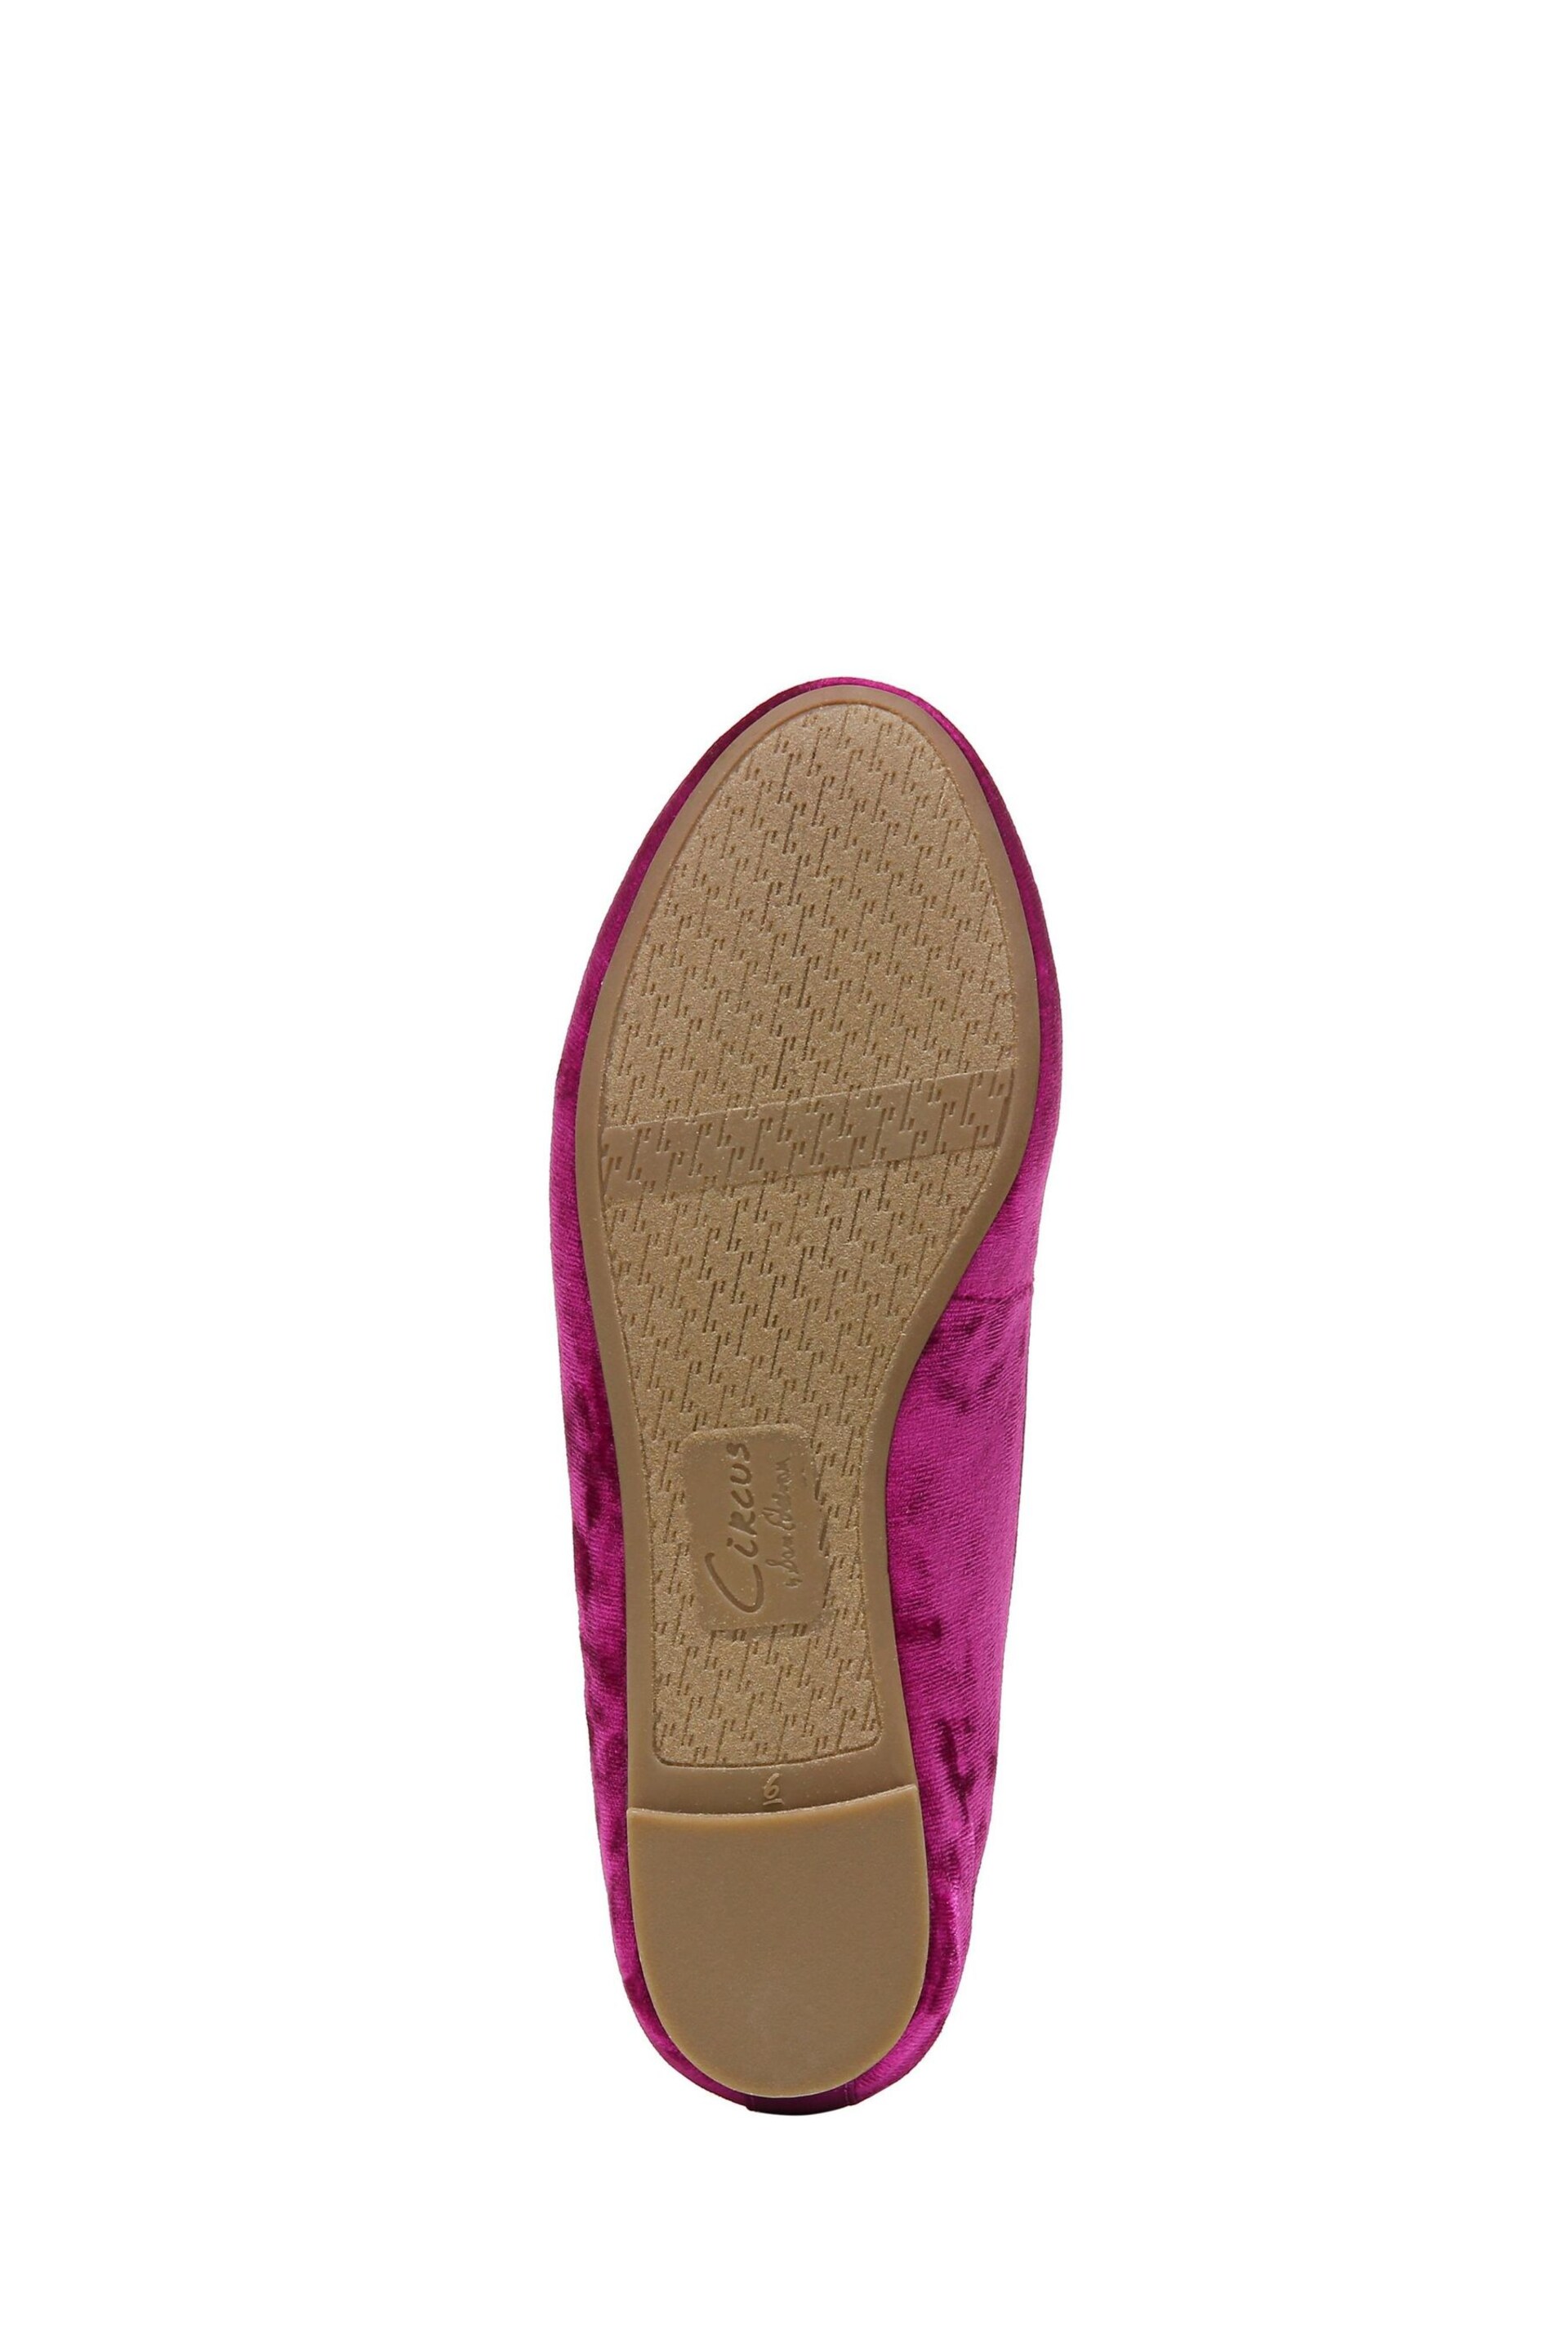 Circus NY Crissy Slip On Shoes - Image 7 of 7